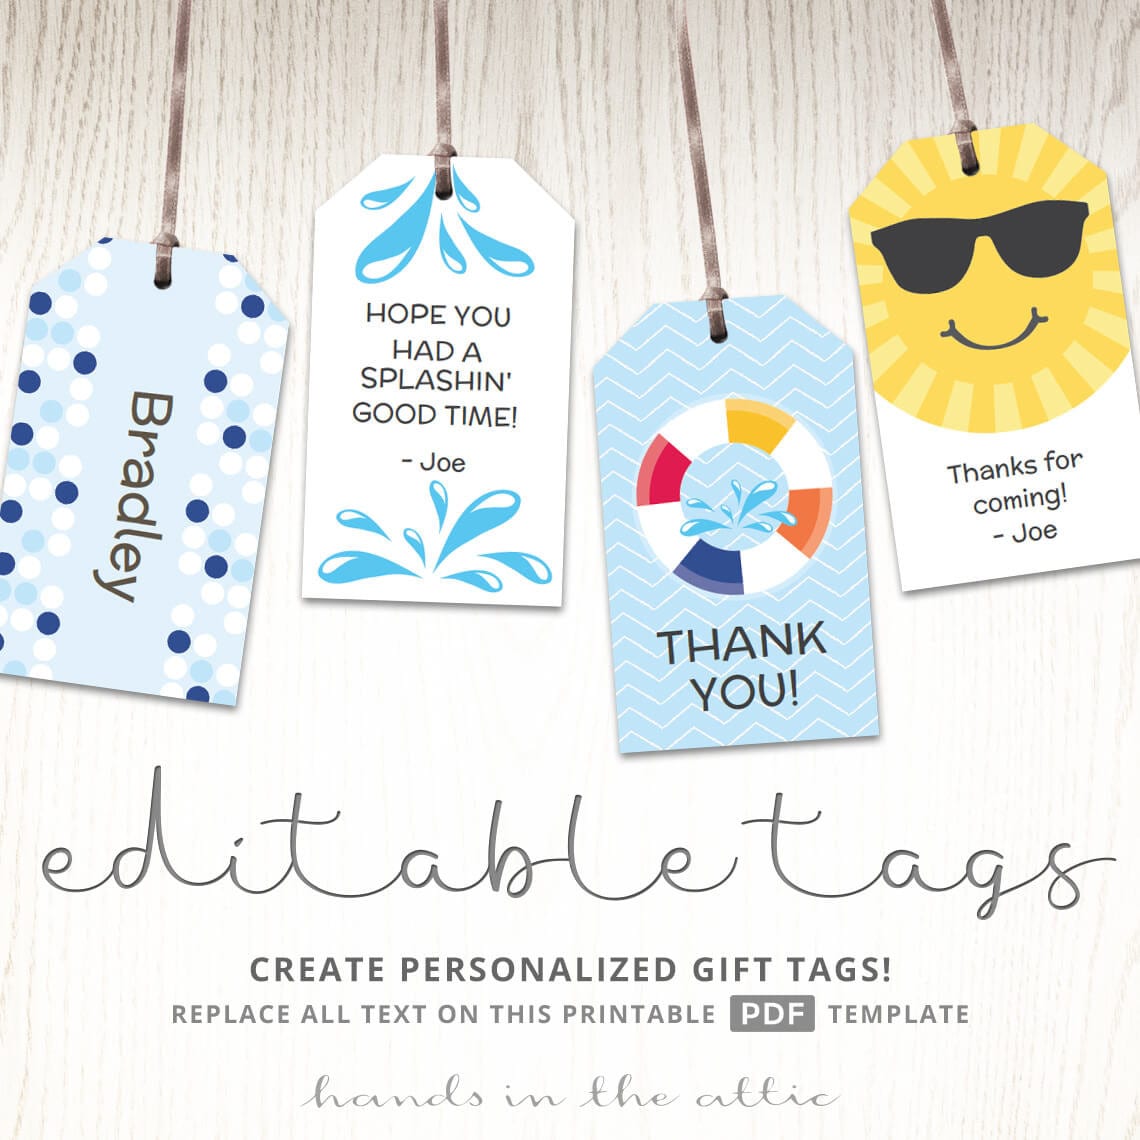 Editable gift tags gift tag template favor tags pool party